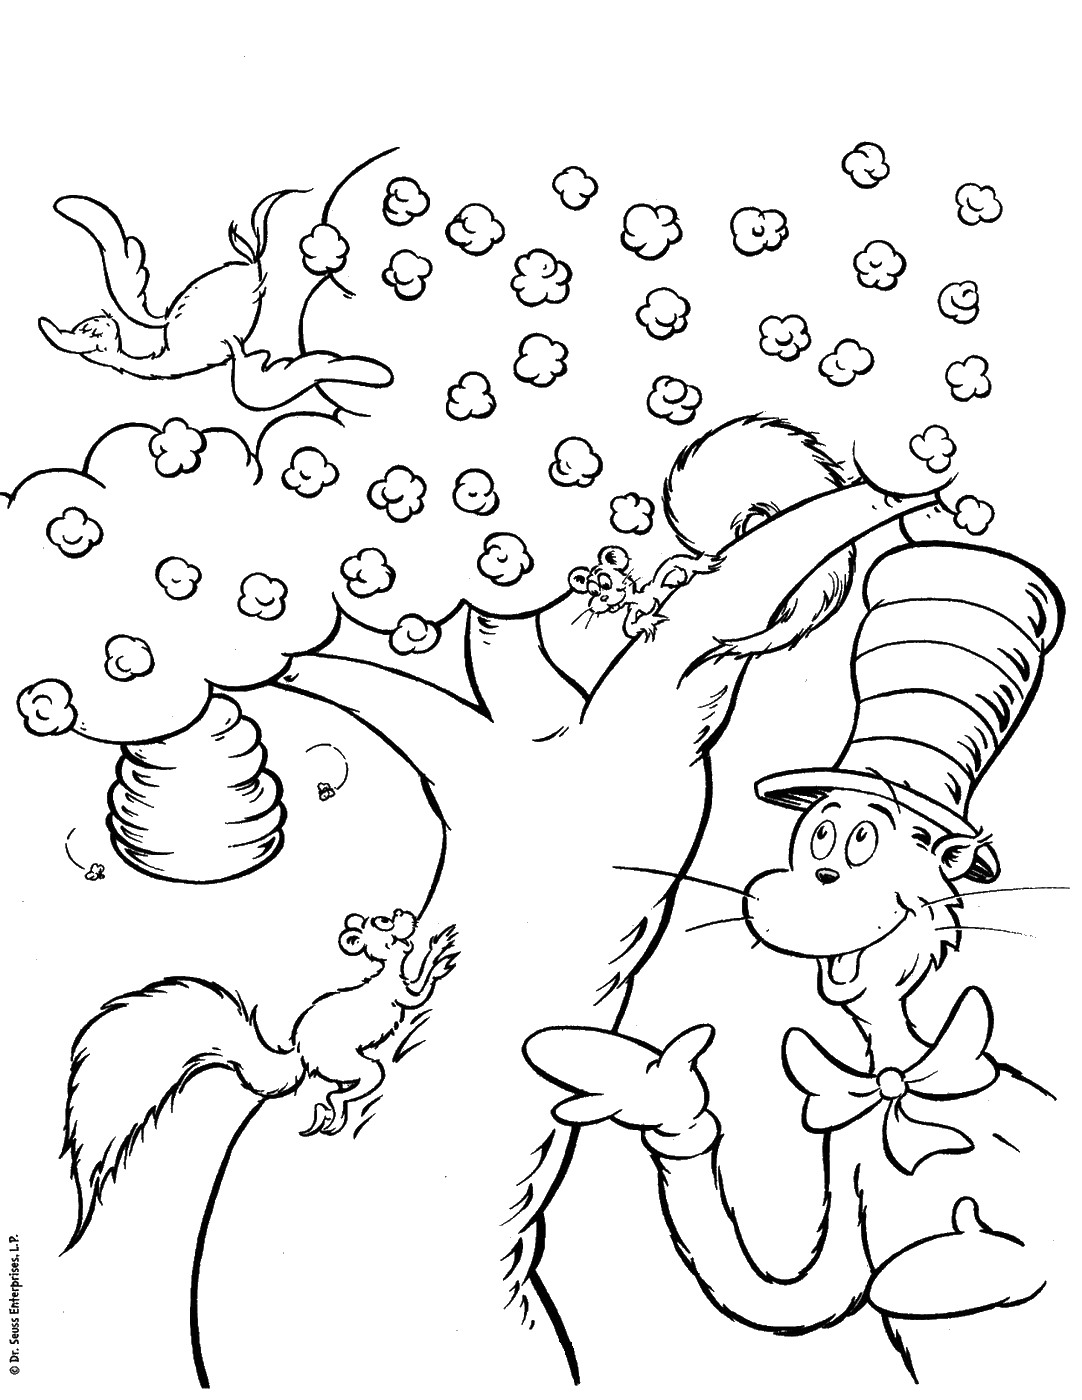 Dr seuss coloring pages â birthday printable